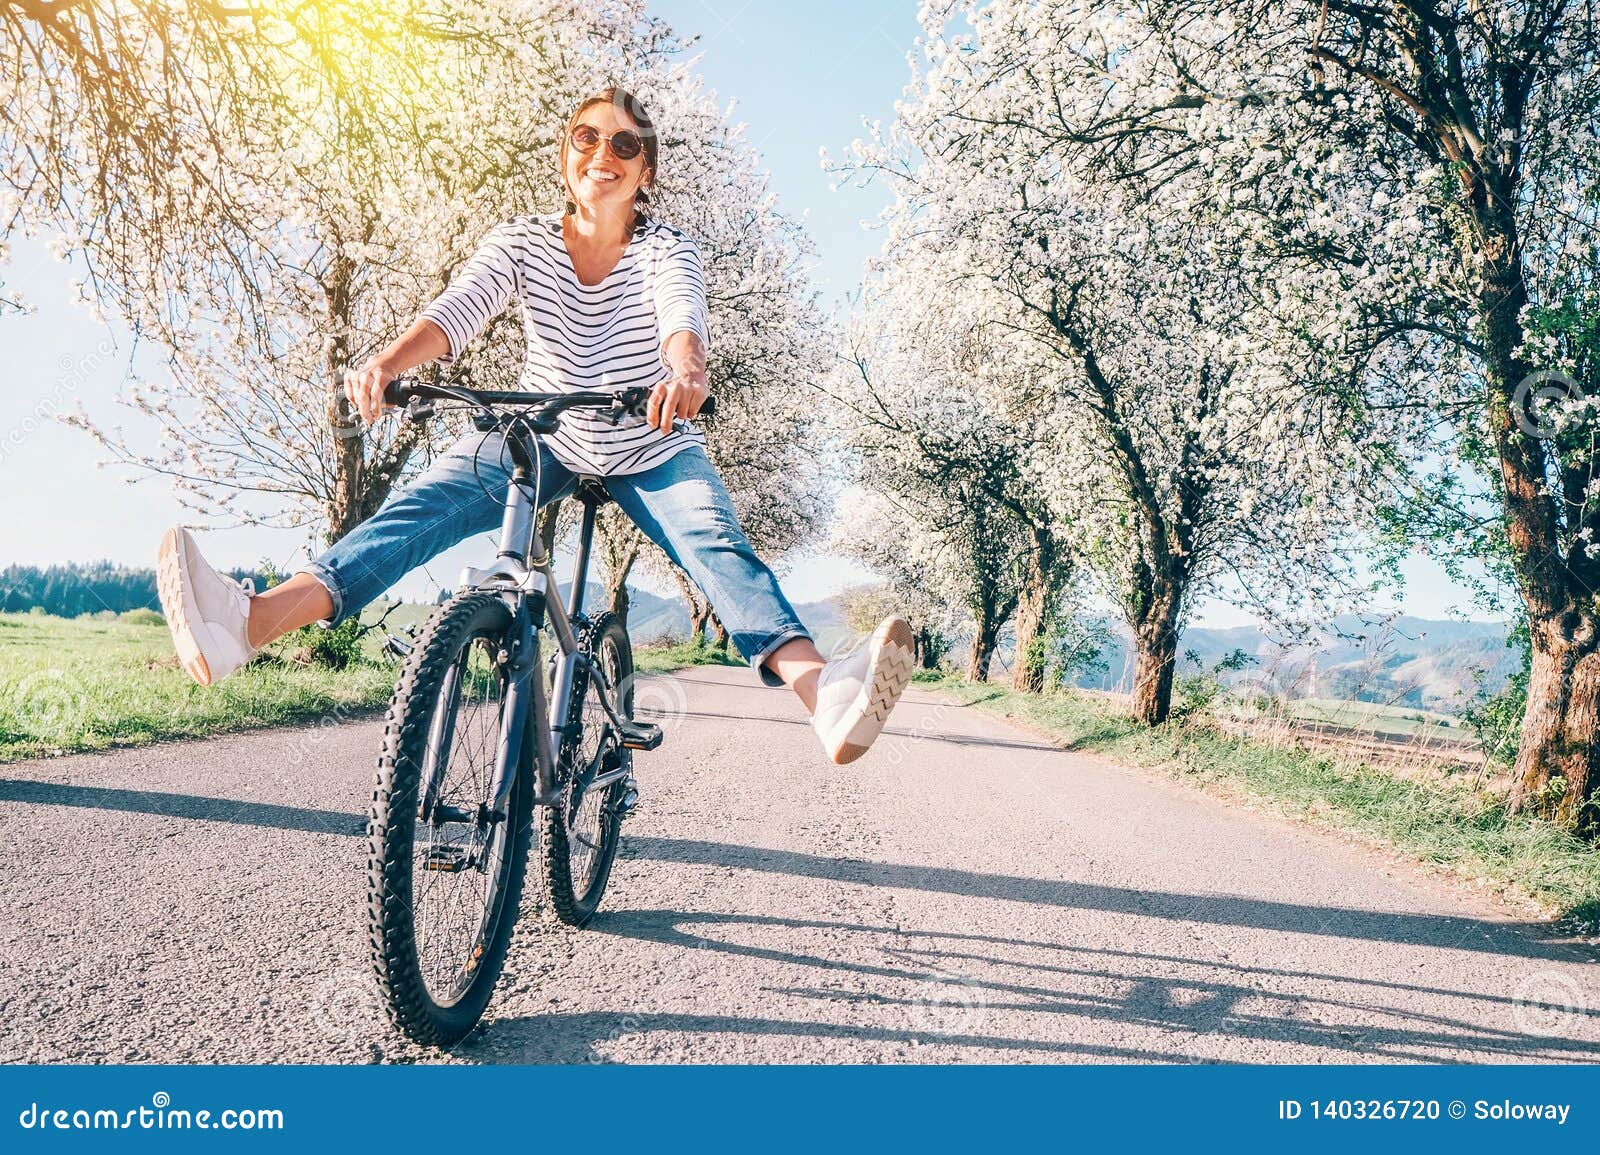 happy smiling woman cheerfully spreads legs on bicycle on the country road under blossom trees. spring is comming concept image